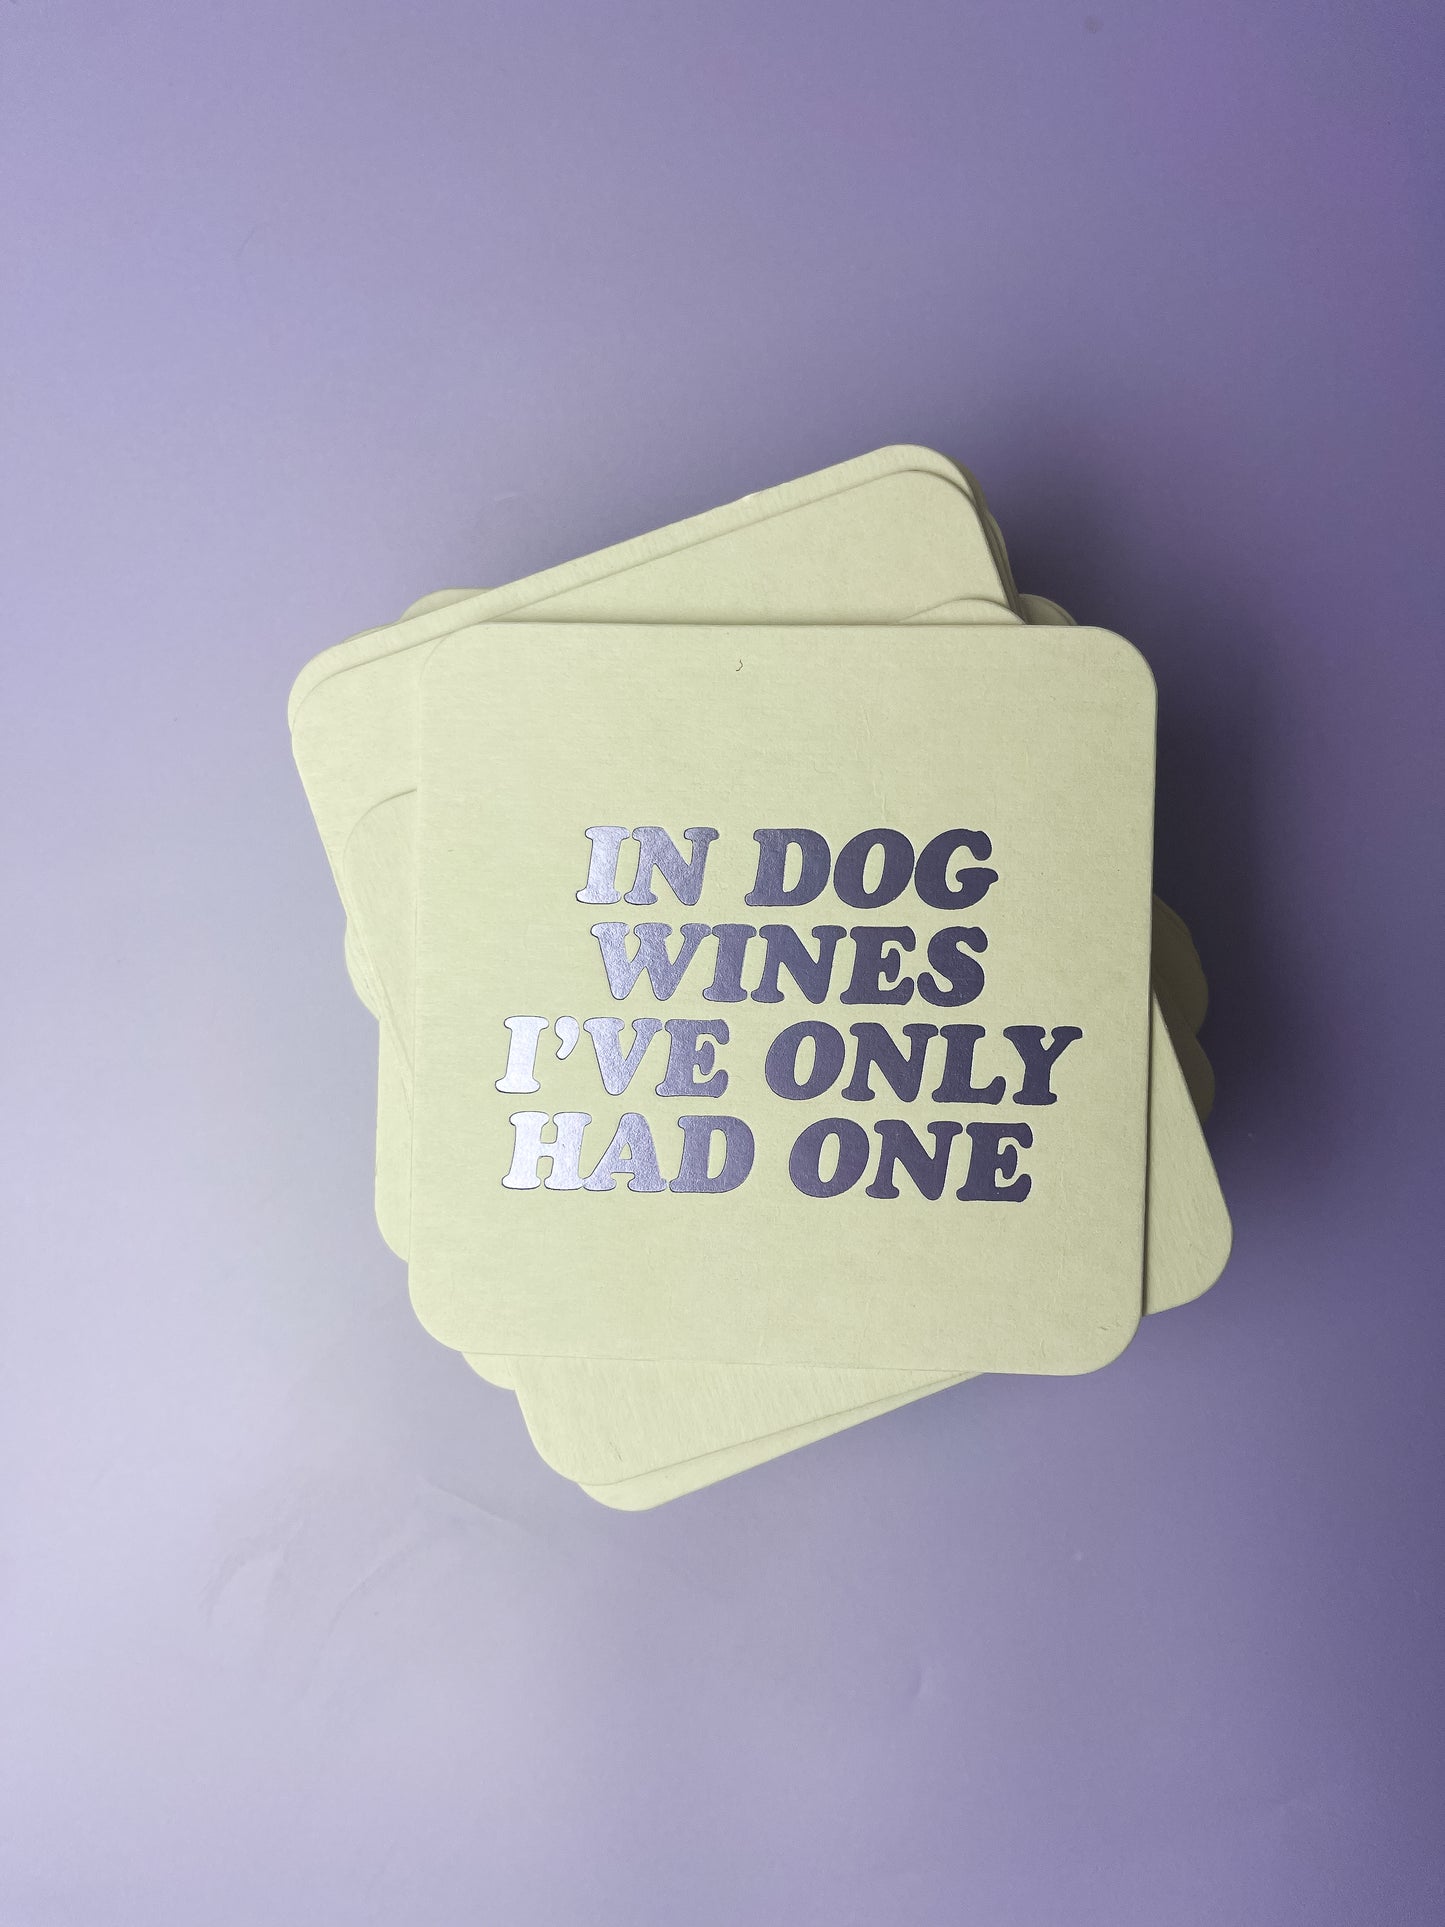 In Dog Wines I've Only Had One Coaster Set